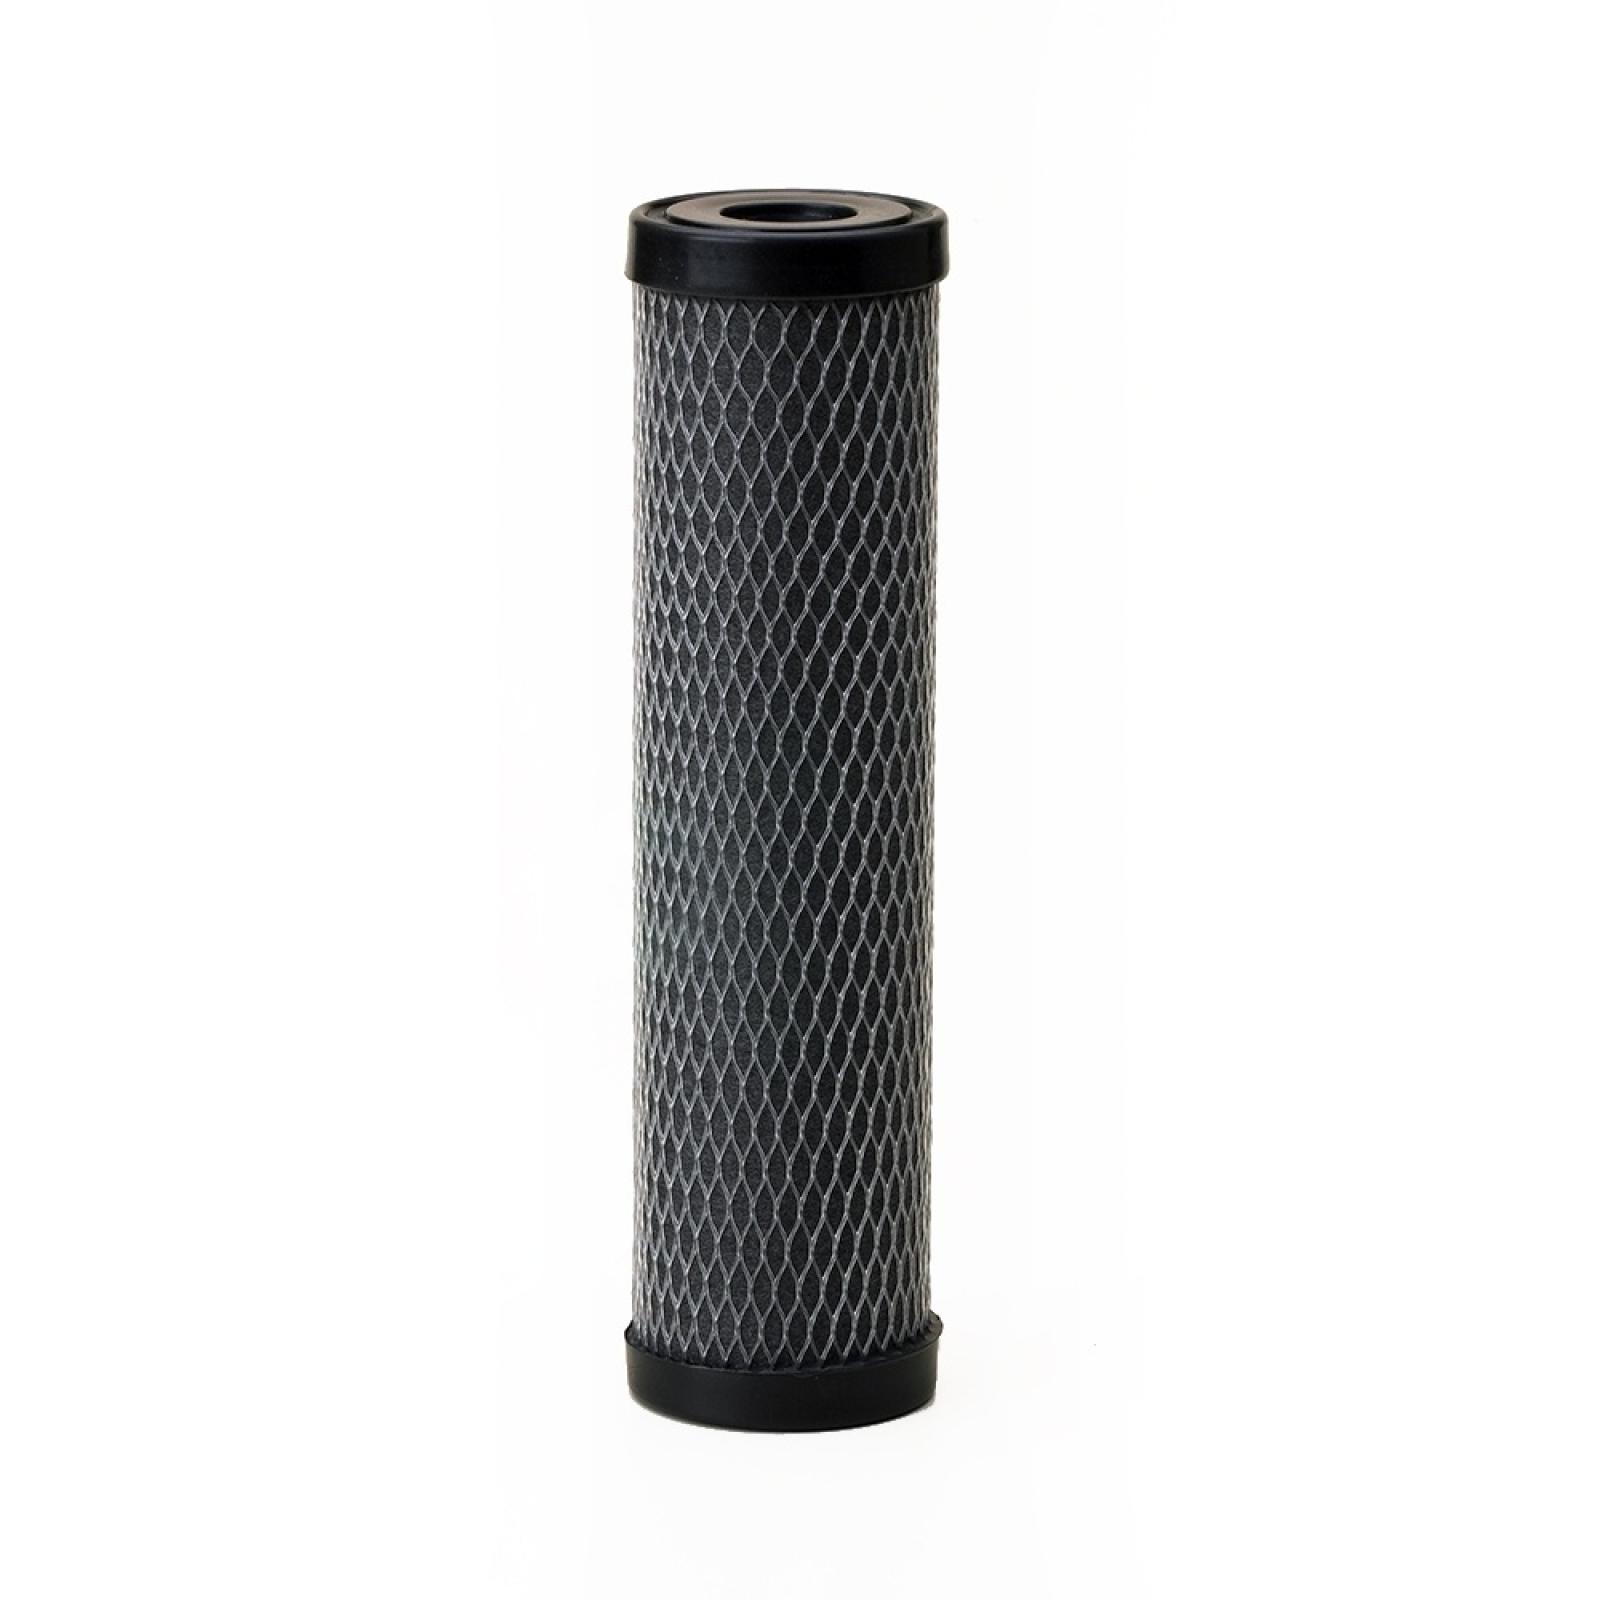 OMNIFilter Replacement Whole House Water Filter Cartridge